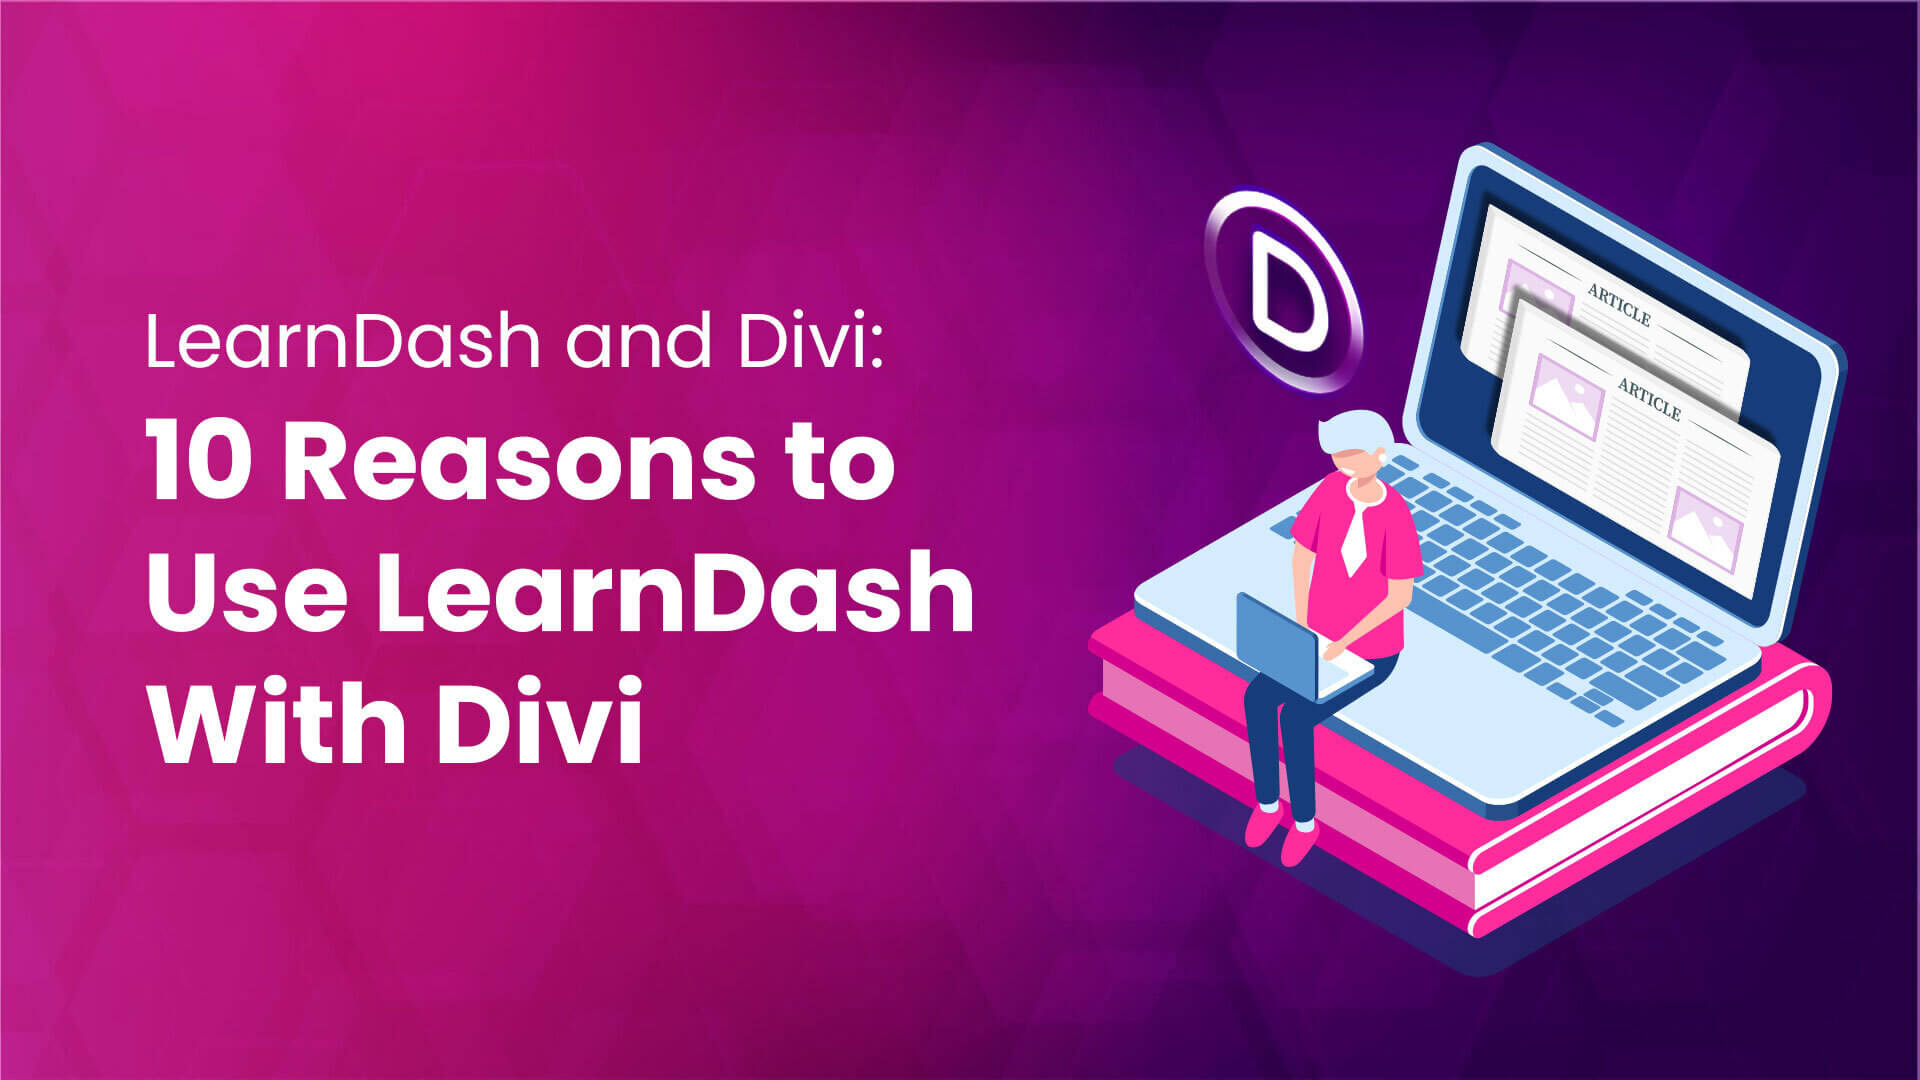 LearnDash and Divi 10 Reasons to Use LearnDash With Divi